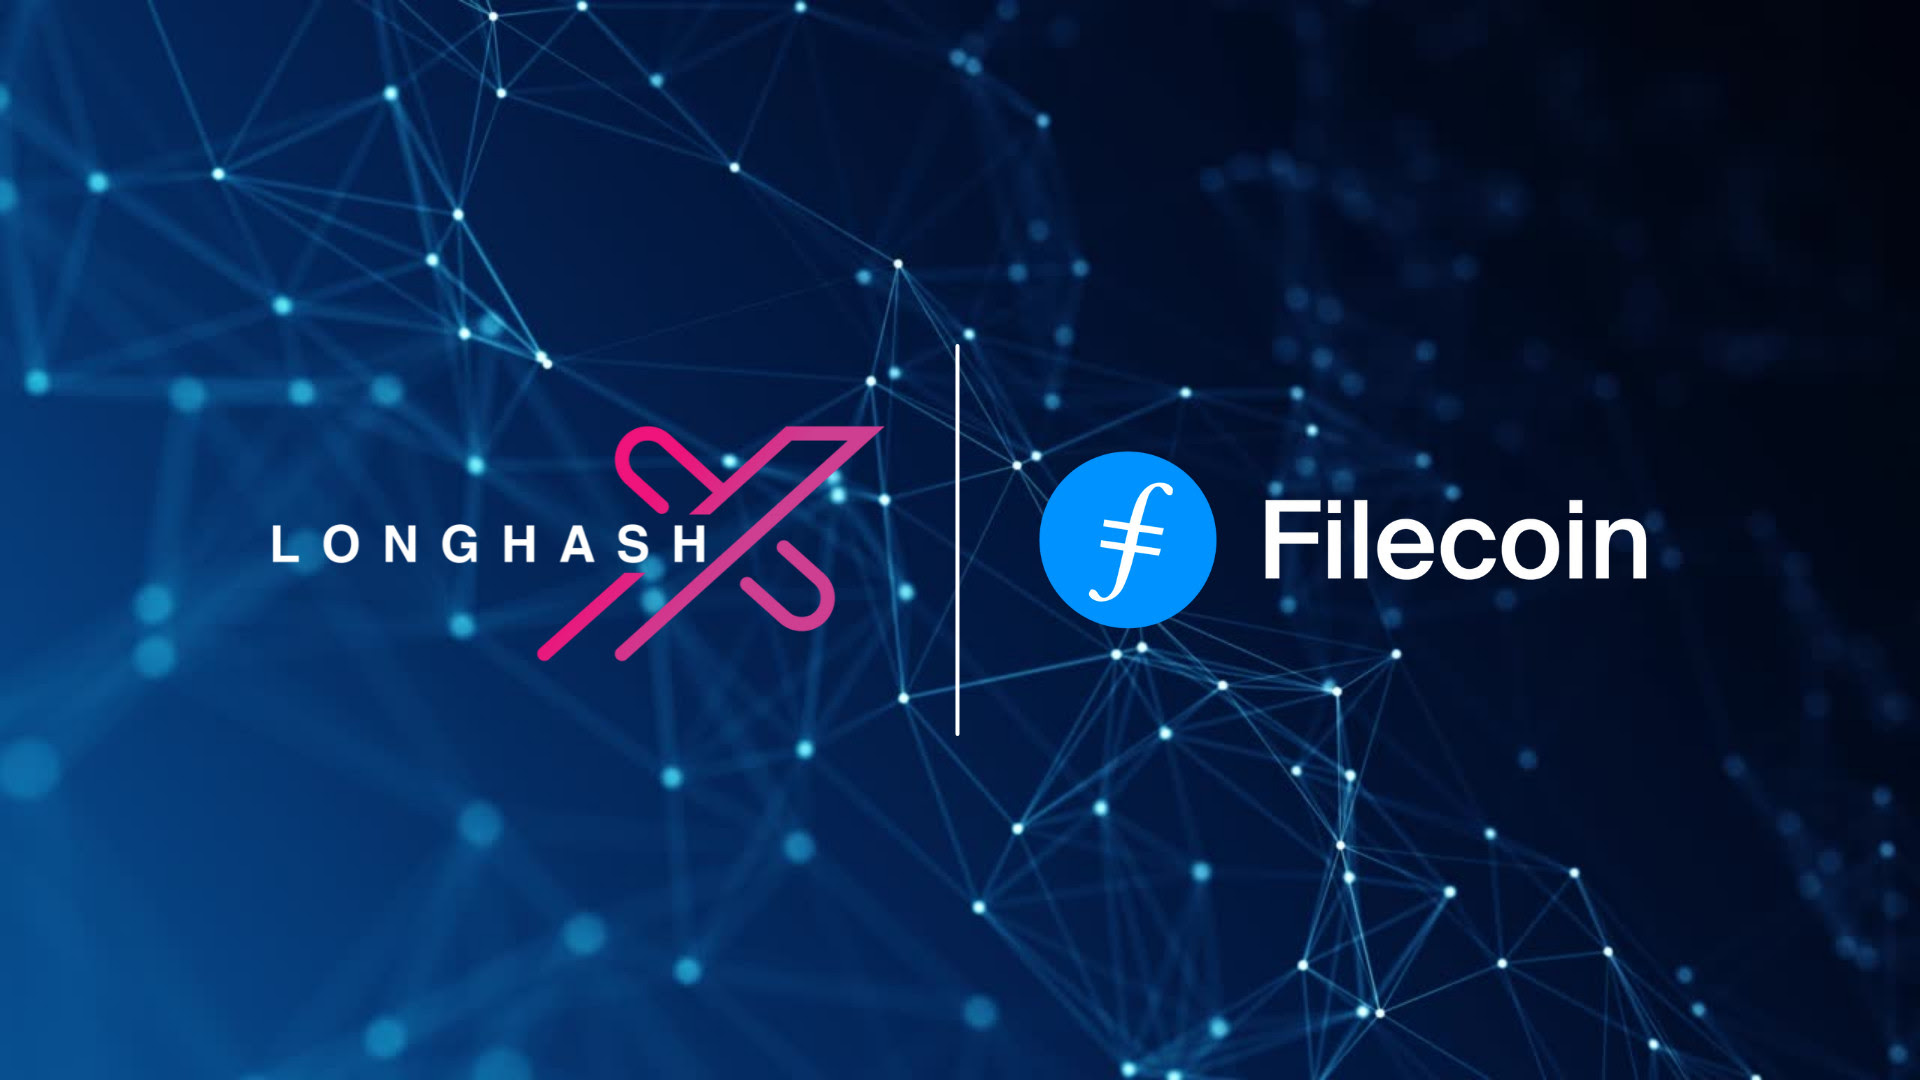 LongHash Ventures And Protocol Labs Join Forces To Launch The 3rd LongHashX Accelerator Filecoin Cohort